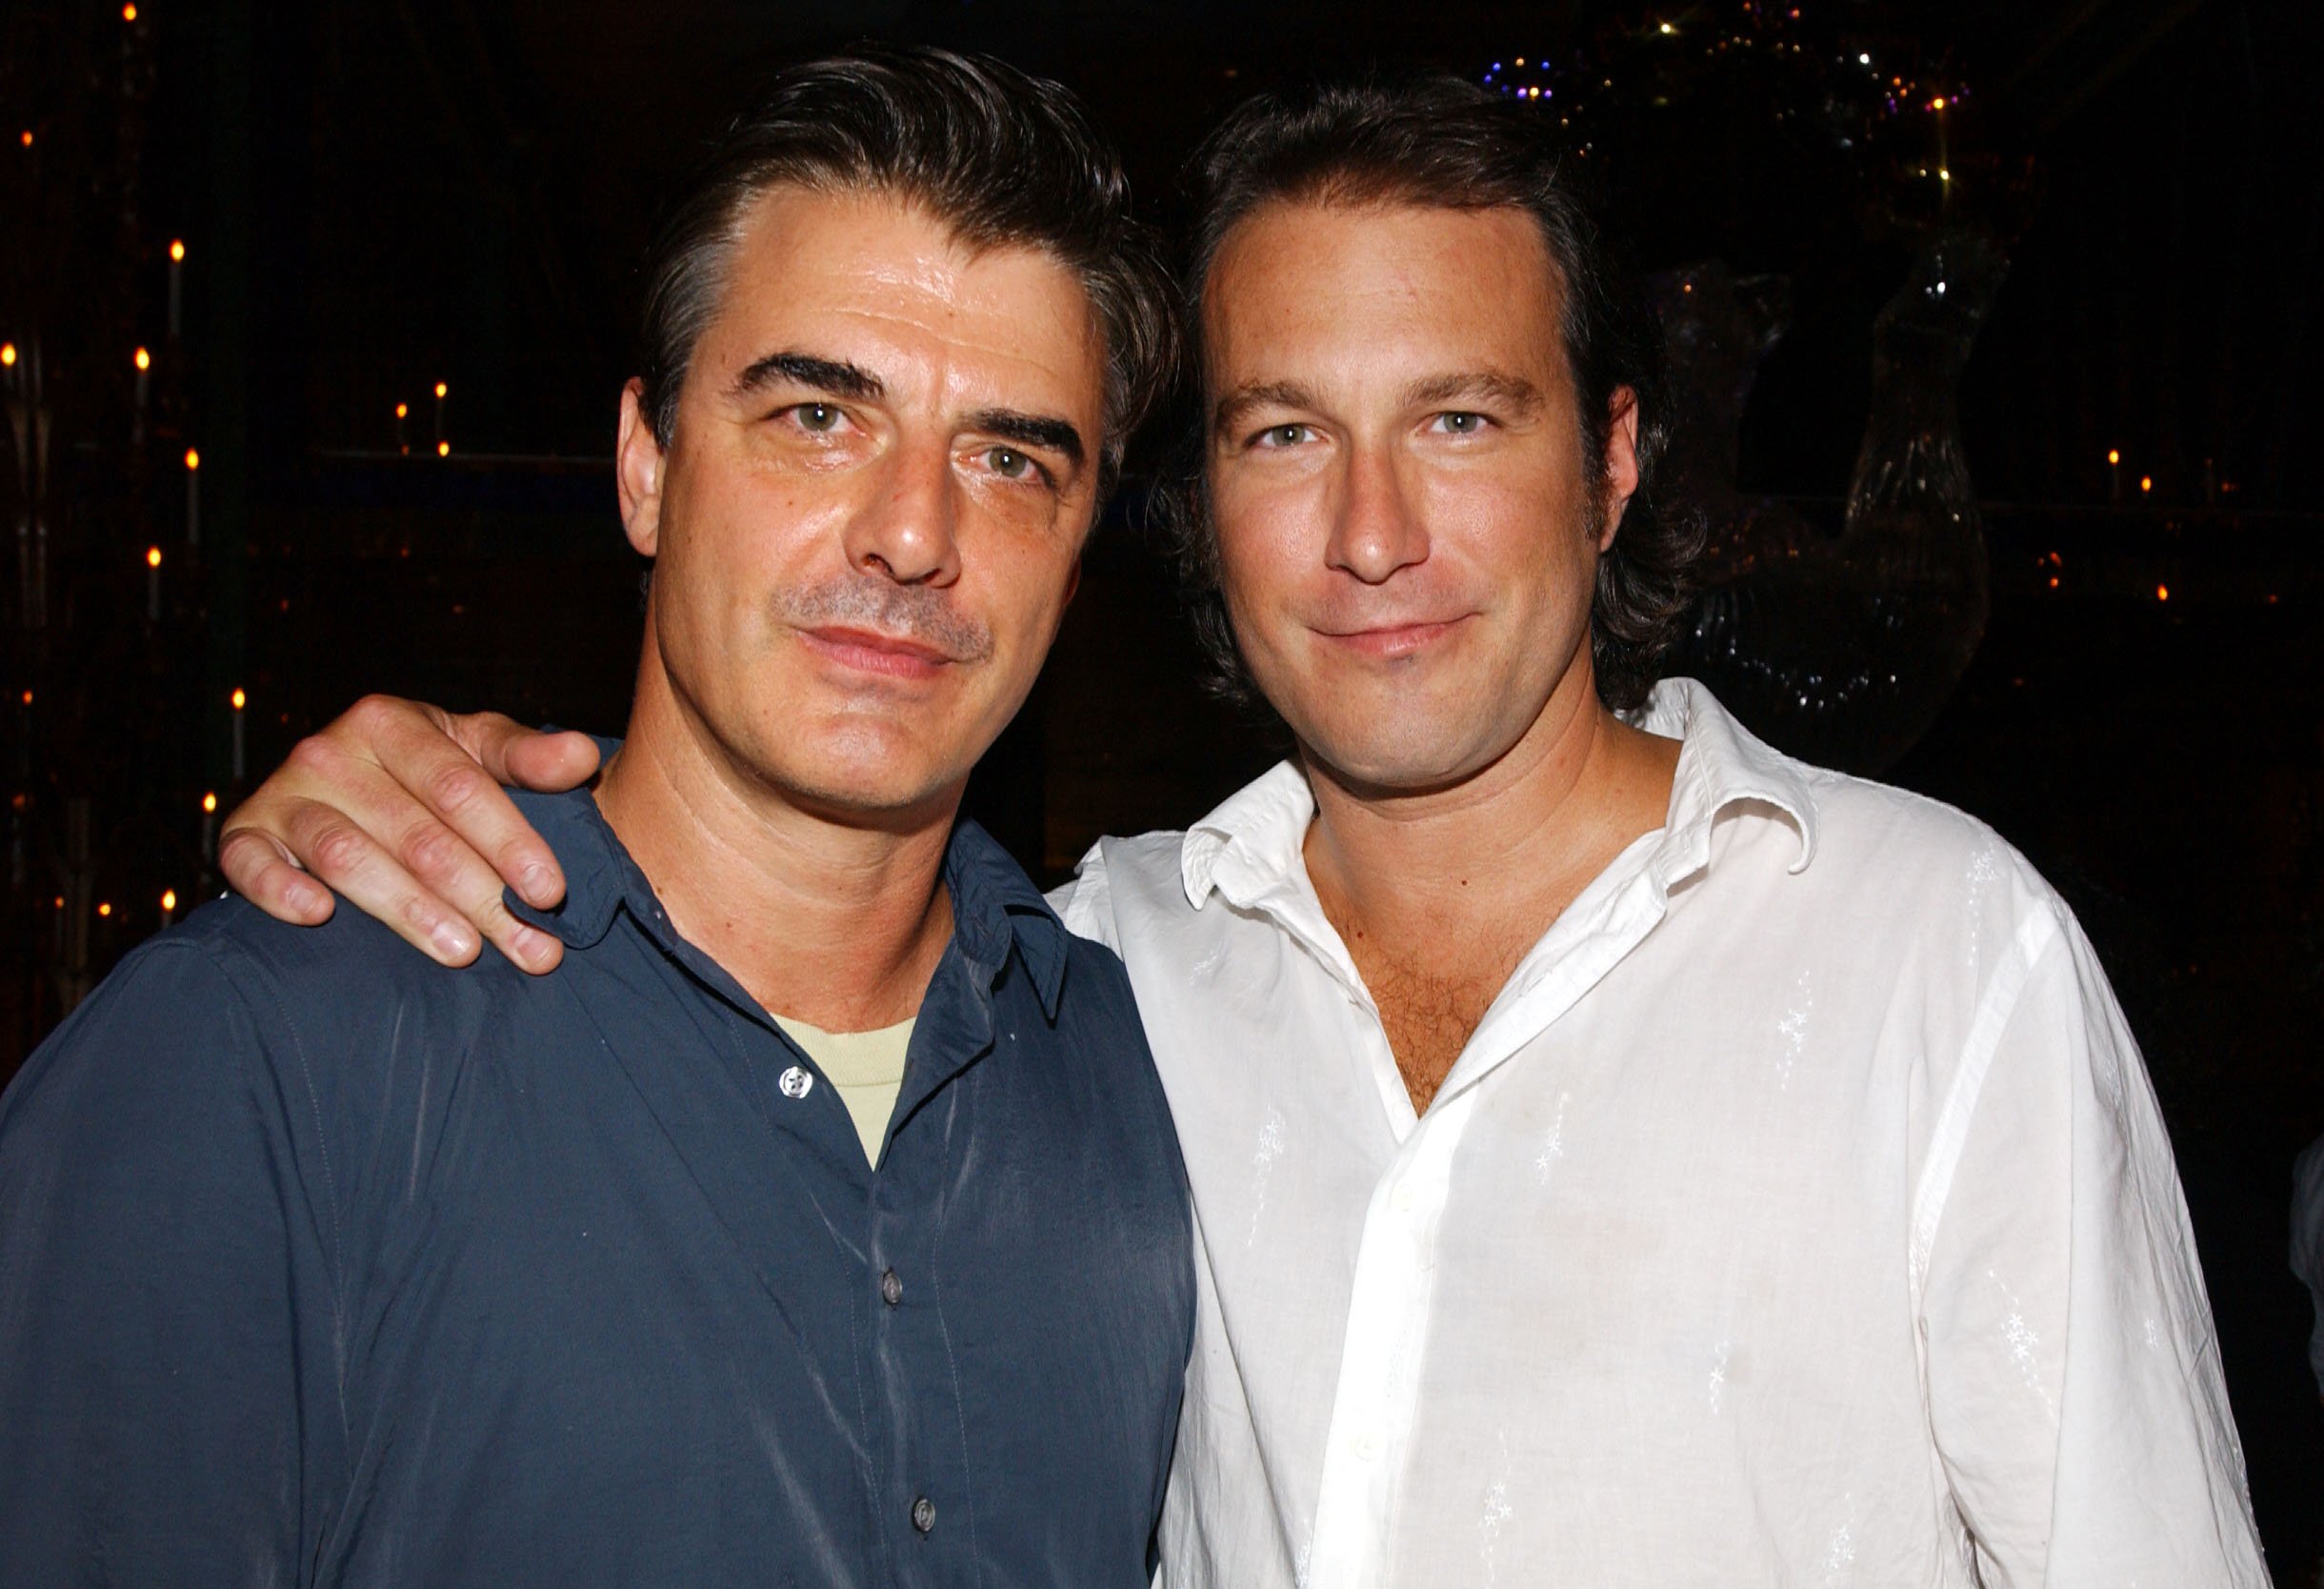 Chris Noth and John Corbett at the "K-19: The Widowmaker" NY Premiere Party at the Russian Tea Room in New York City, July 17, 2002 | Photo: Getty Images